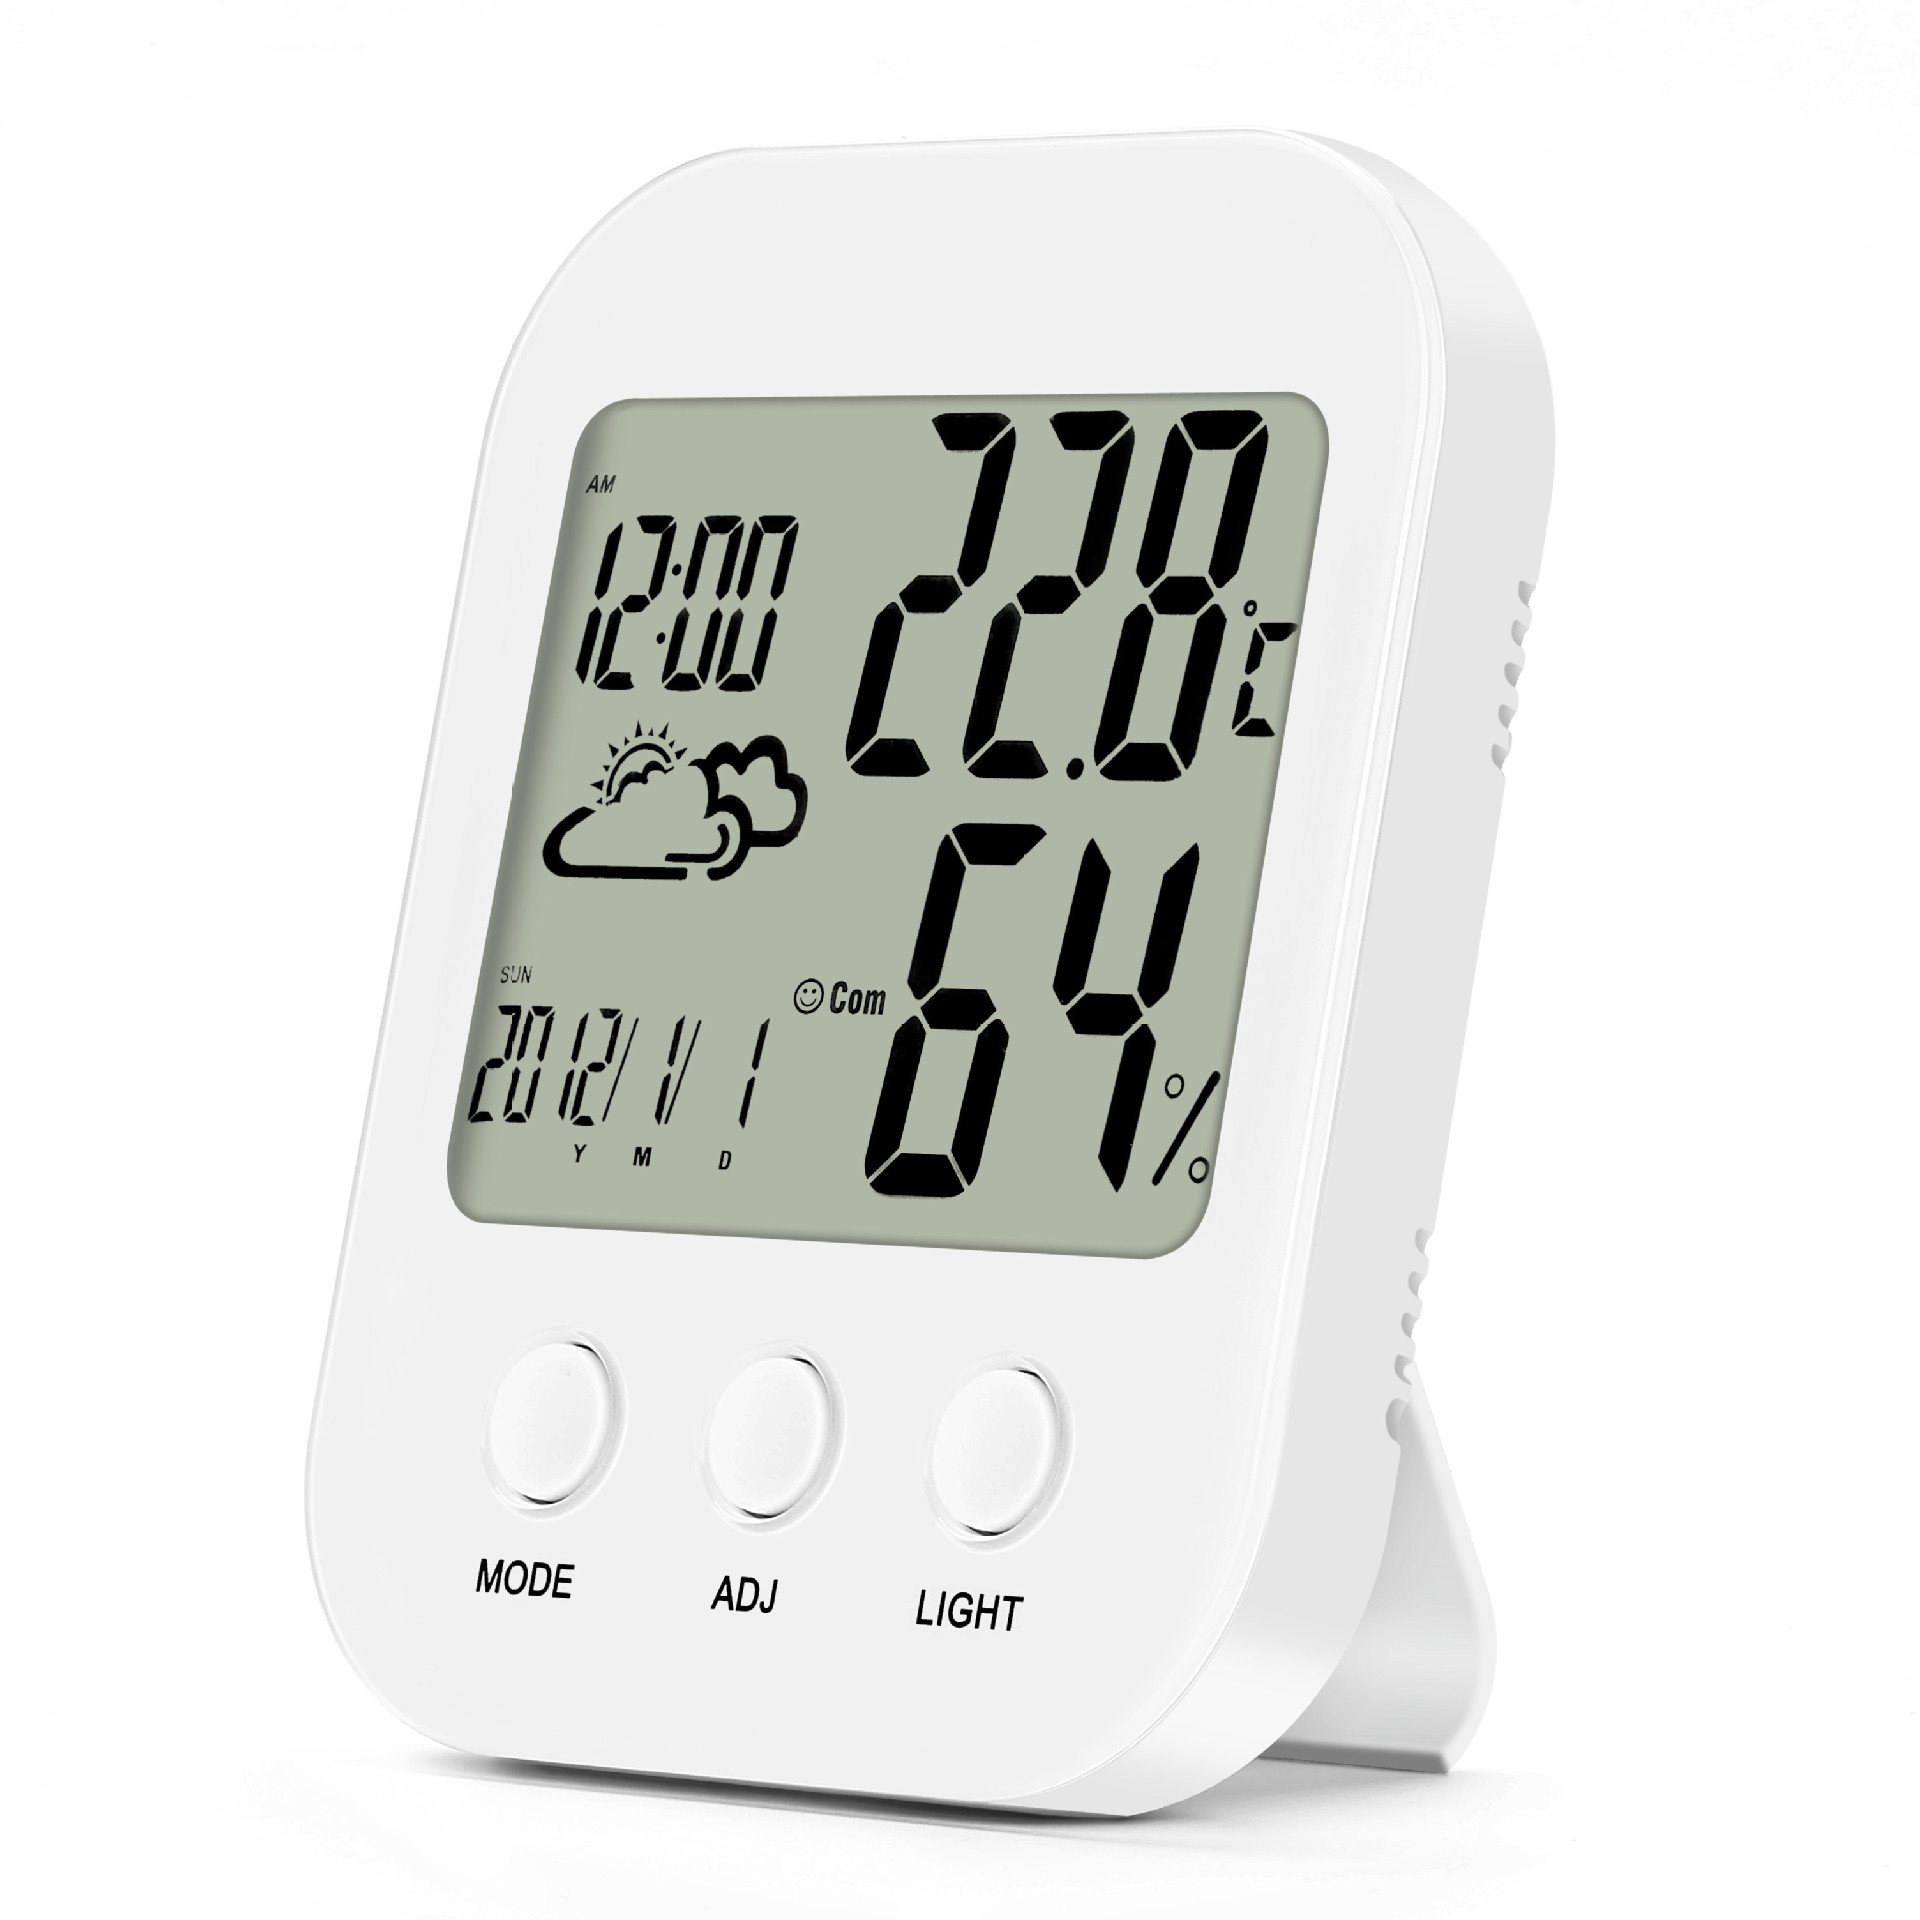 

Loskii DC-10 Indoor Humidity And Thermometer Monitor Digital Alarm Clock Calendar And Home Weather Station Large LCD Backlight Display